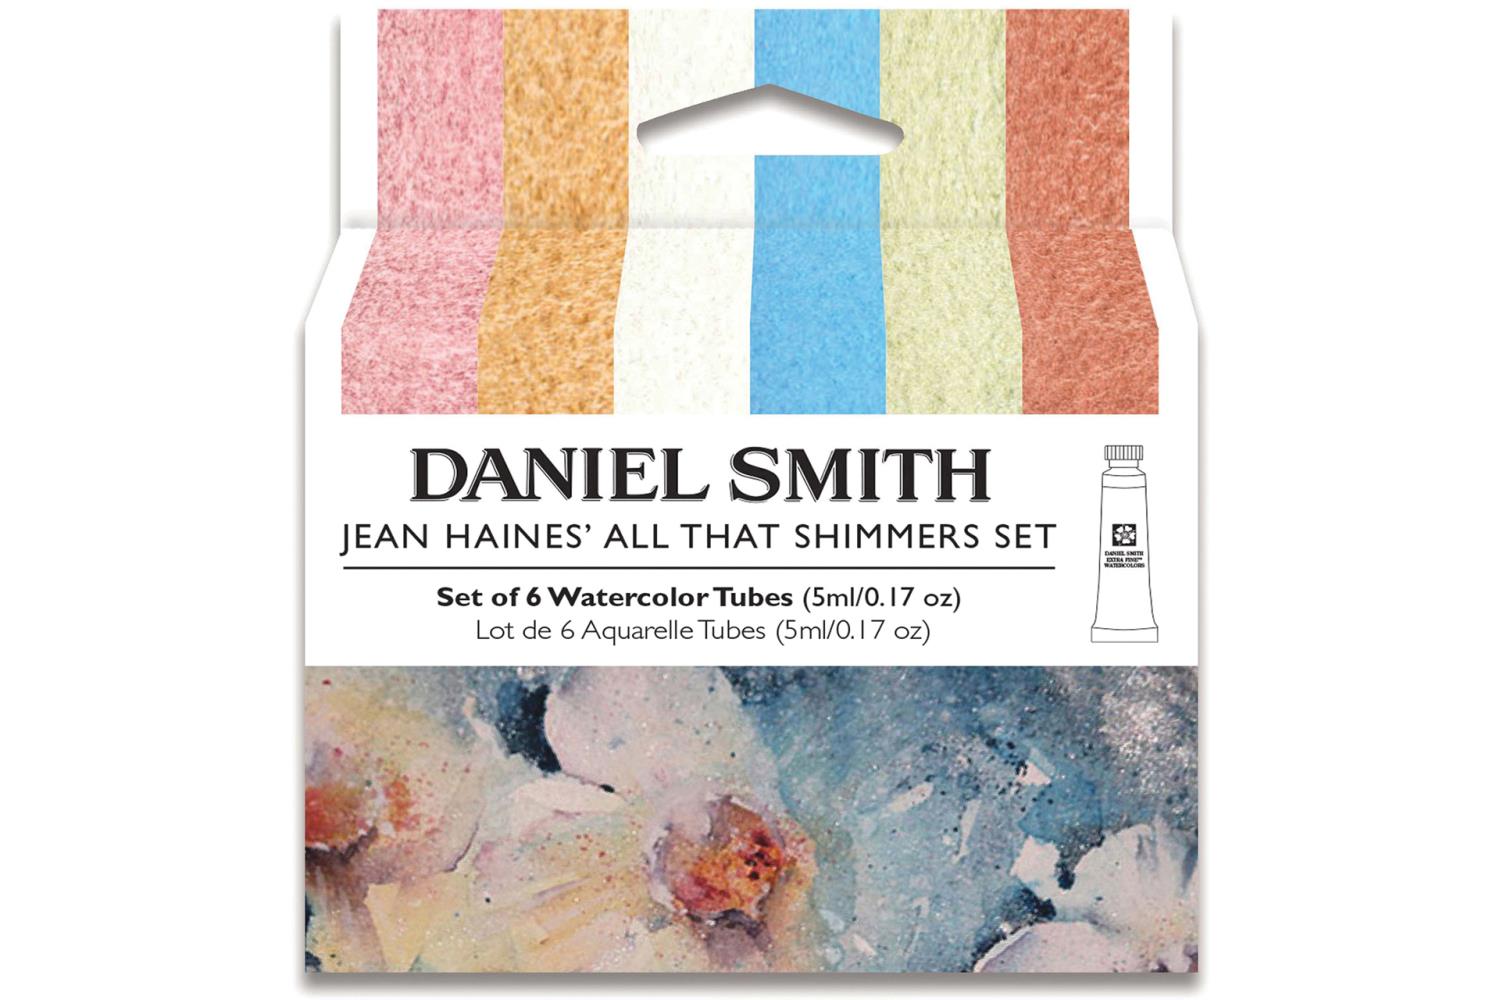 Daniel Smith Extra fine Watercolors 5 ml Tubes - Jean Haine`s All that Shimmers Set - 6 Tubes